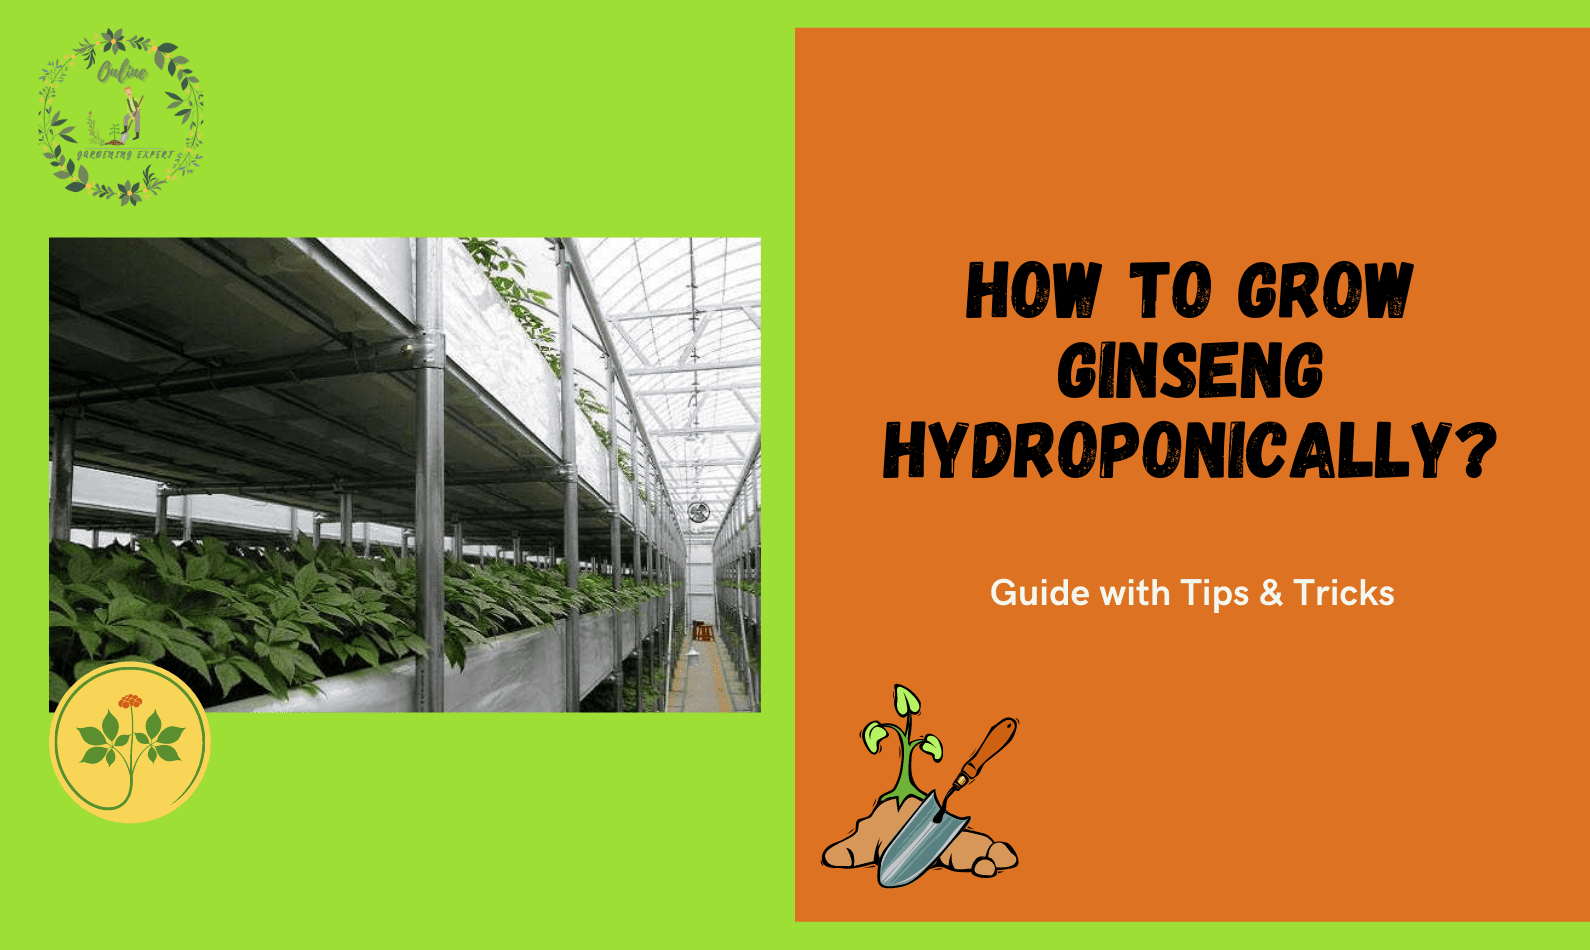 How To Grow Ginseng Hydroponically?